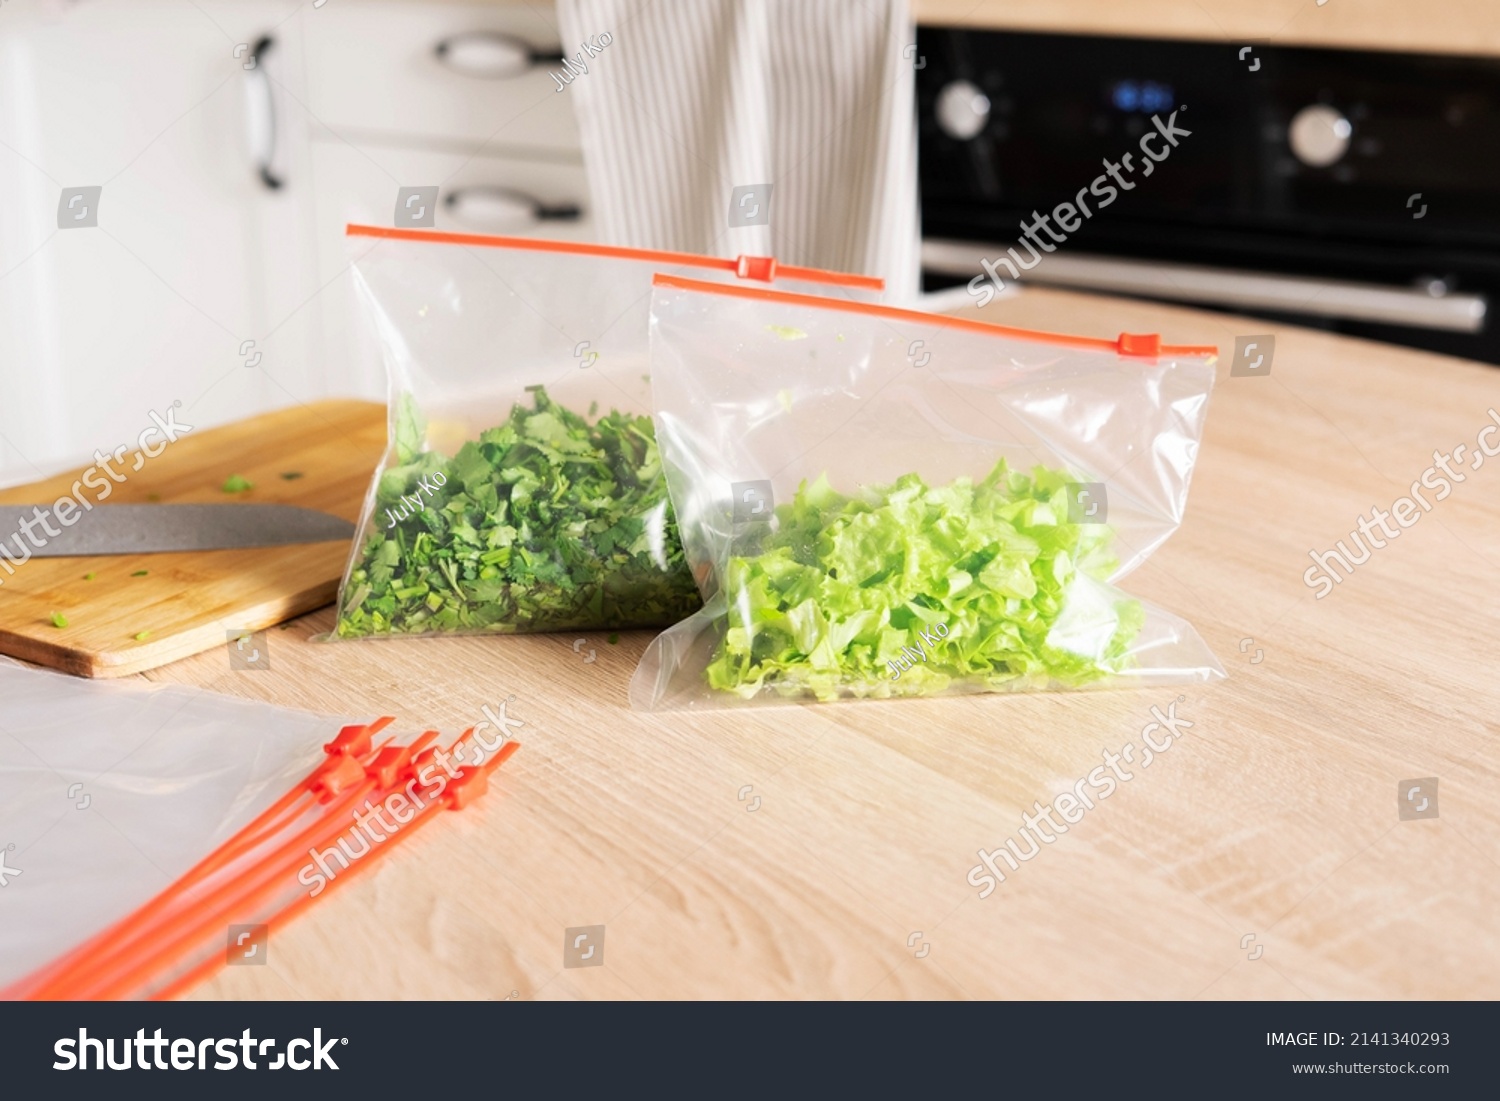 Greenery storage. Cilantro and lettuce in zip bags on the kitchen counter. #2141340293